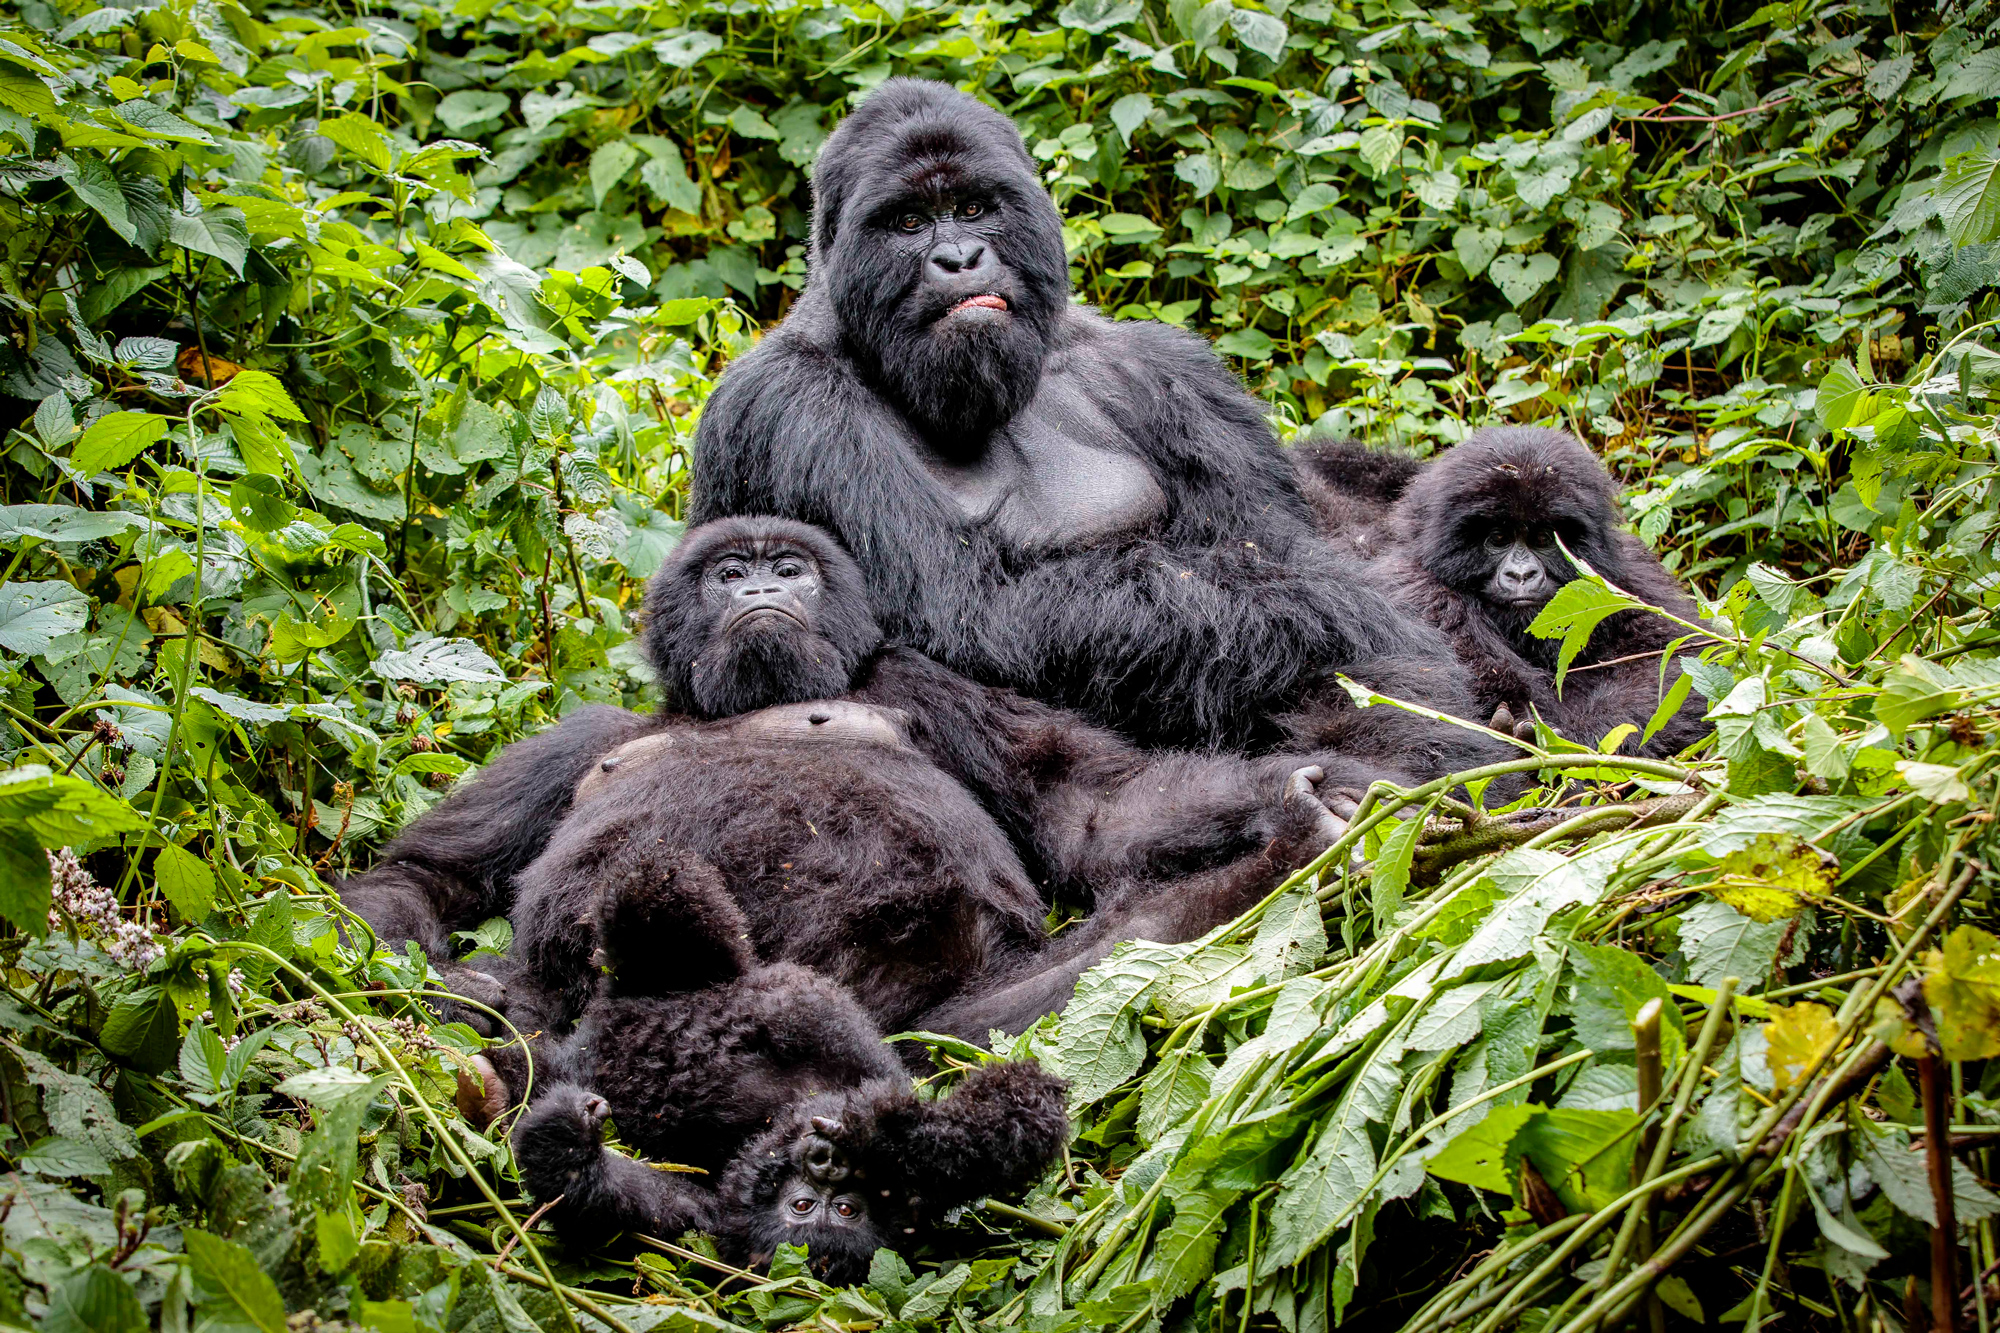 A family portrait of the Rugendo mountain gorilla family in Virunga National Park in the DR Congo